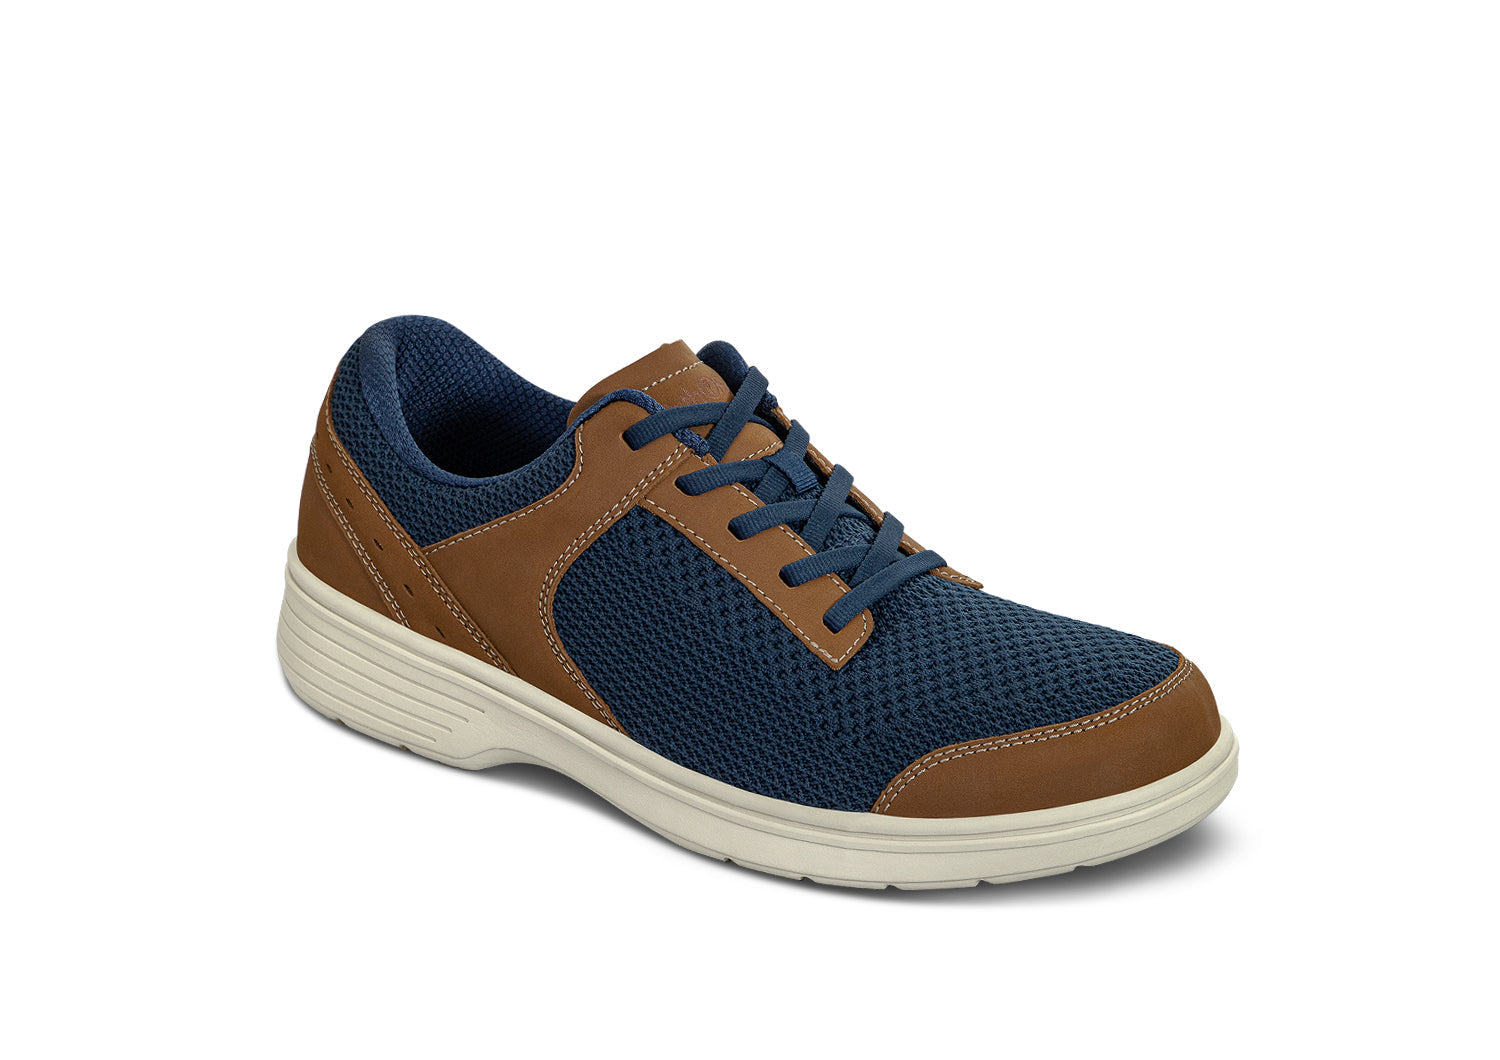 Men's Casual Shoes Orthopedic | Tabor Blue